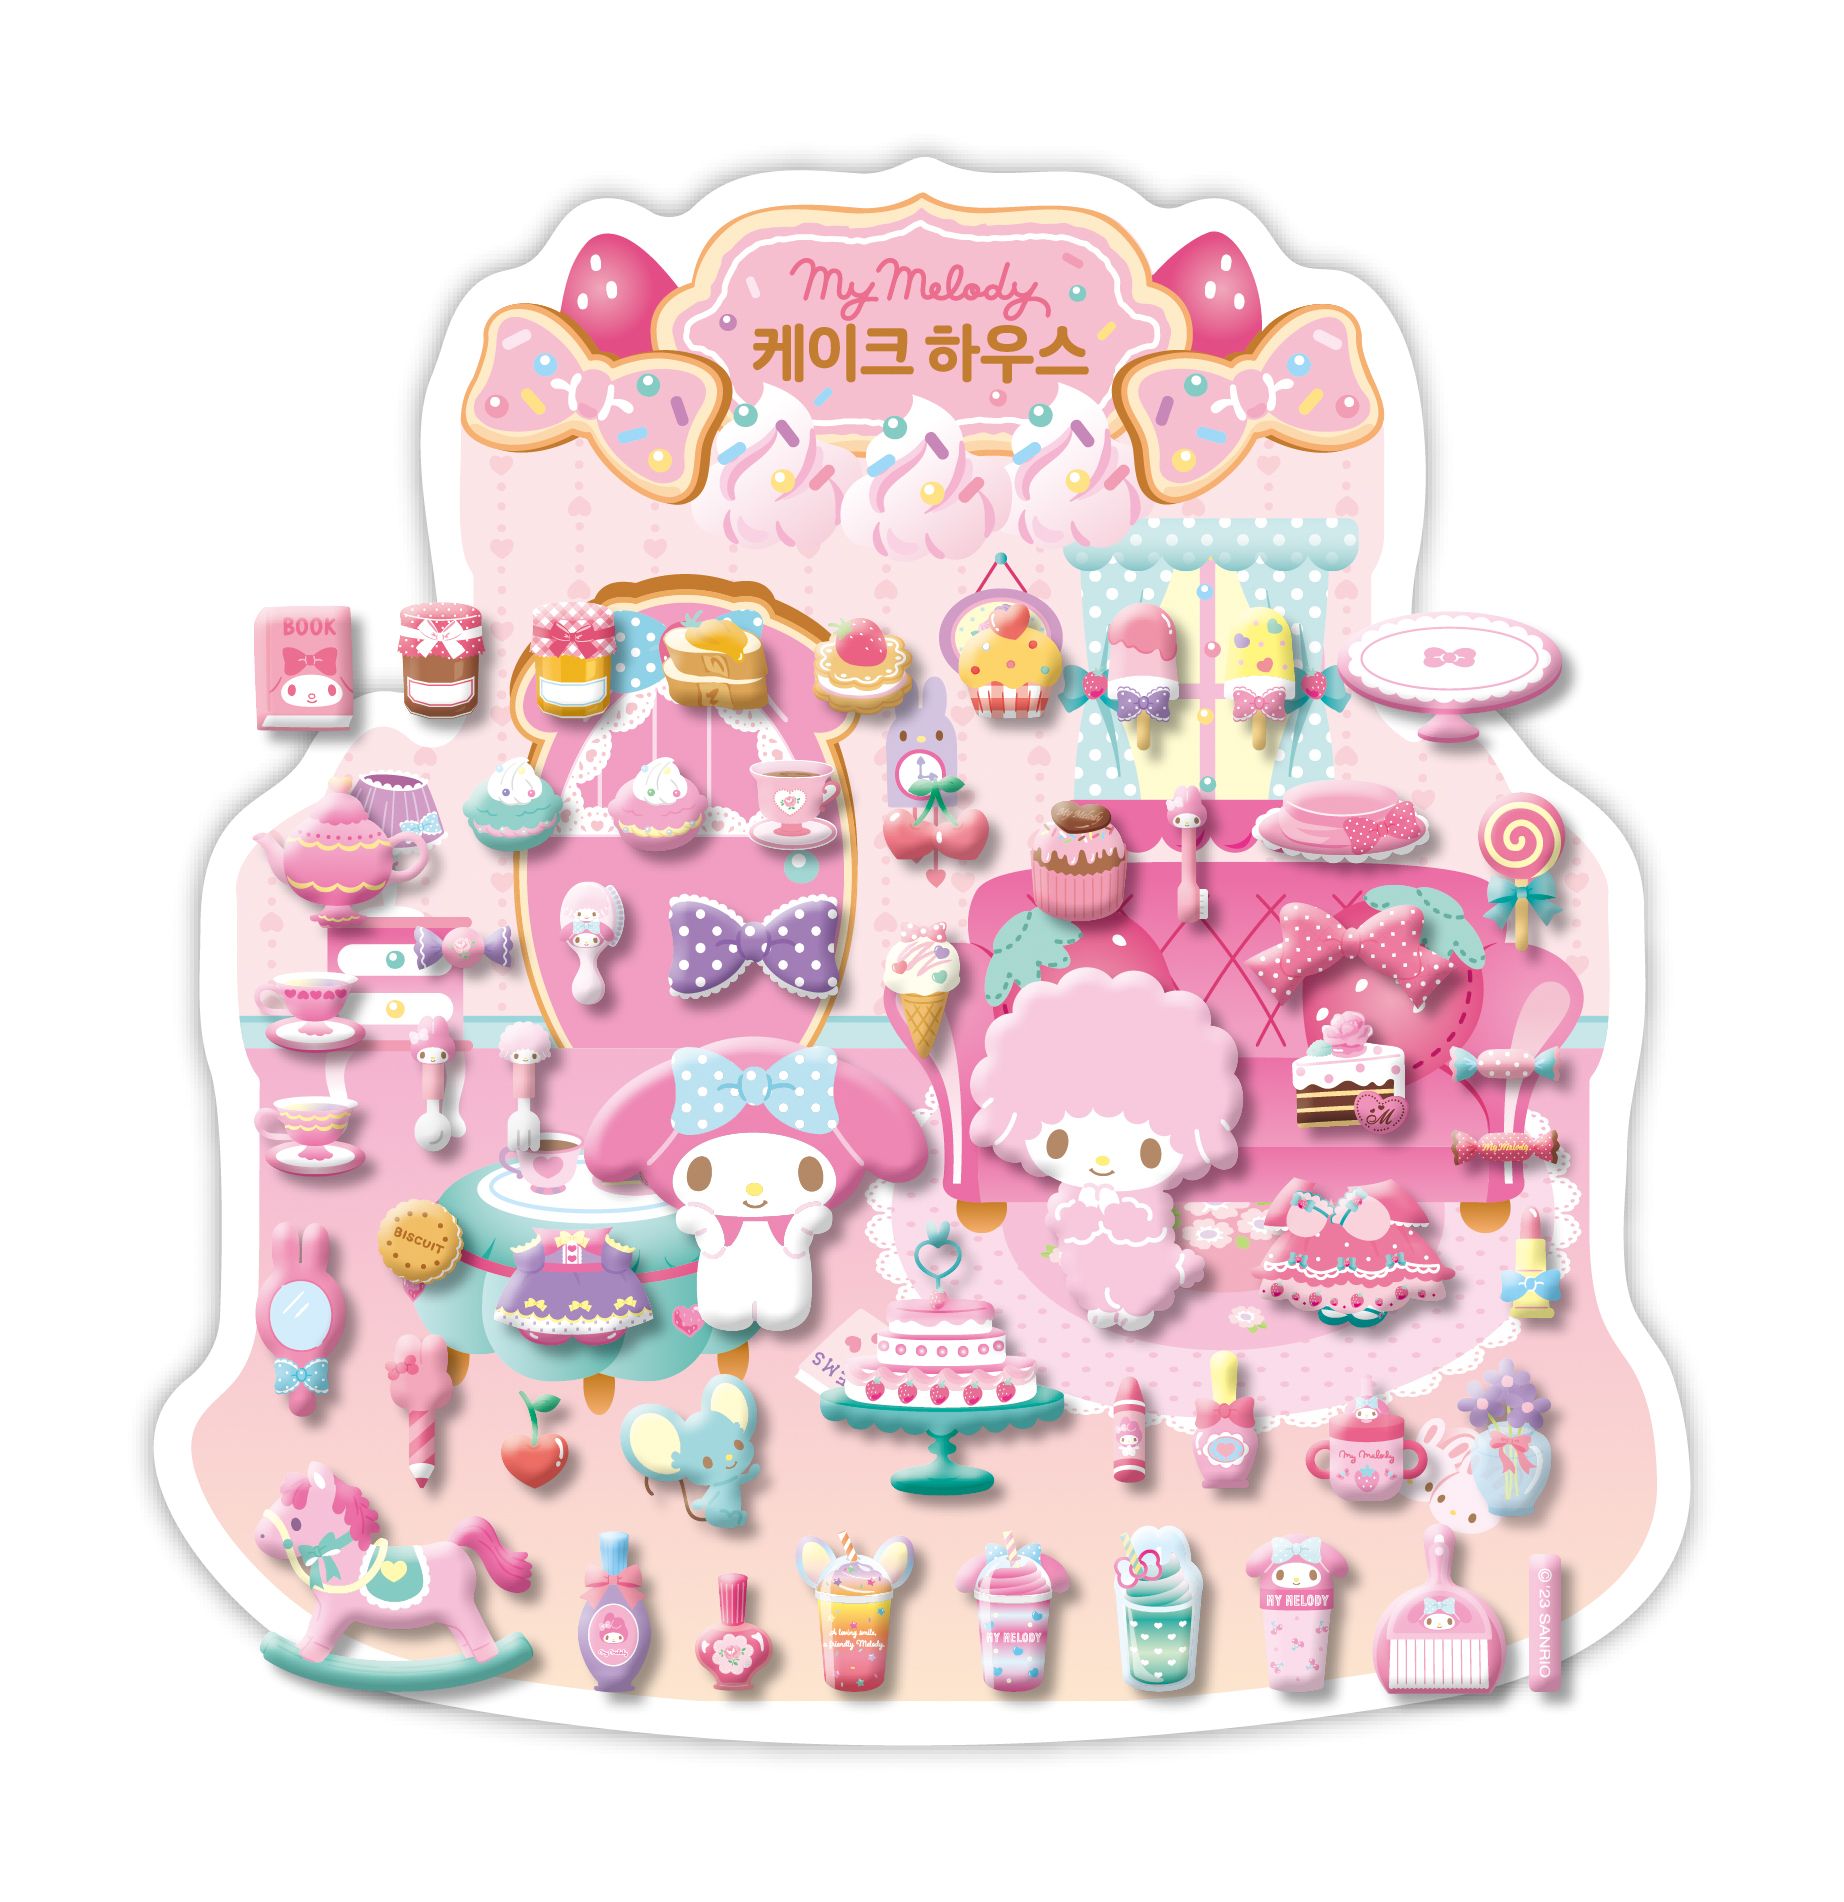 My Melody Cake House Stickers